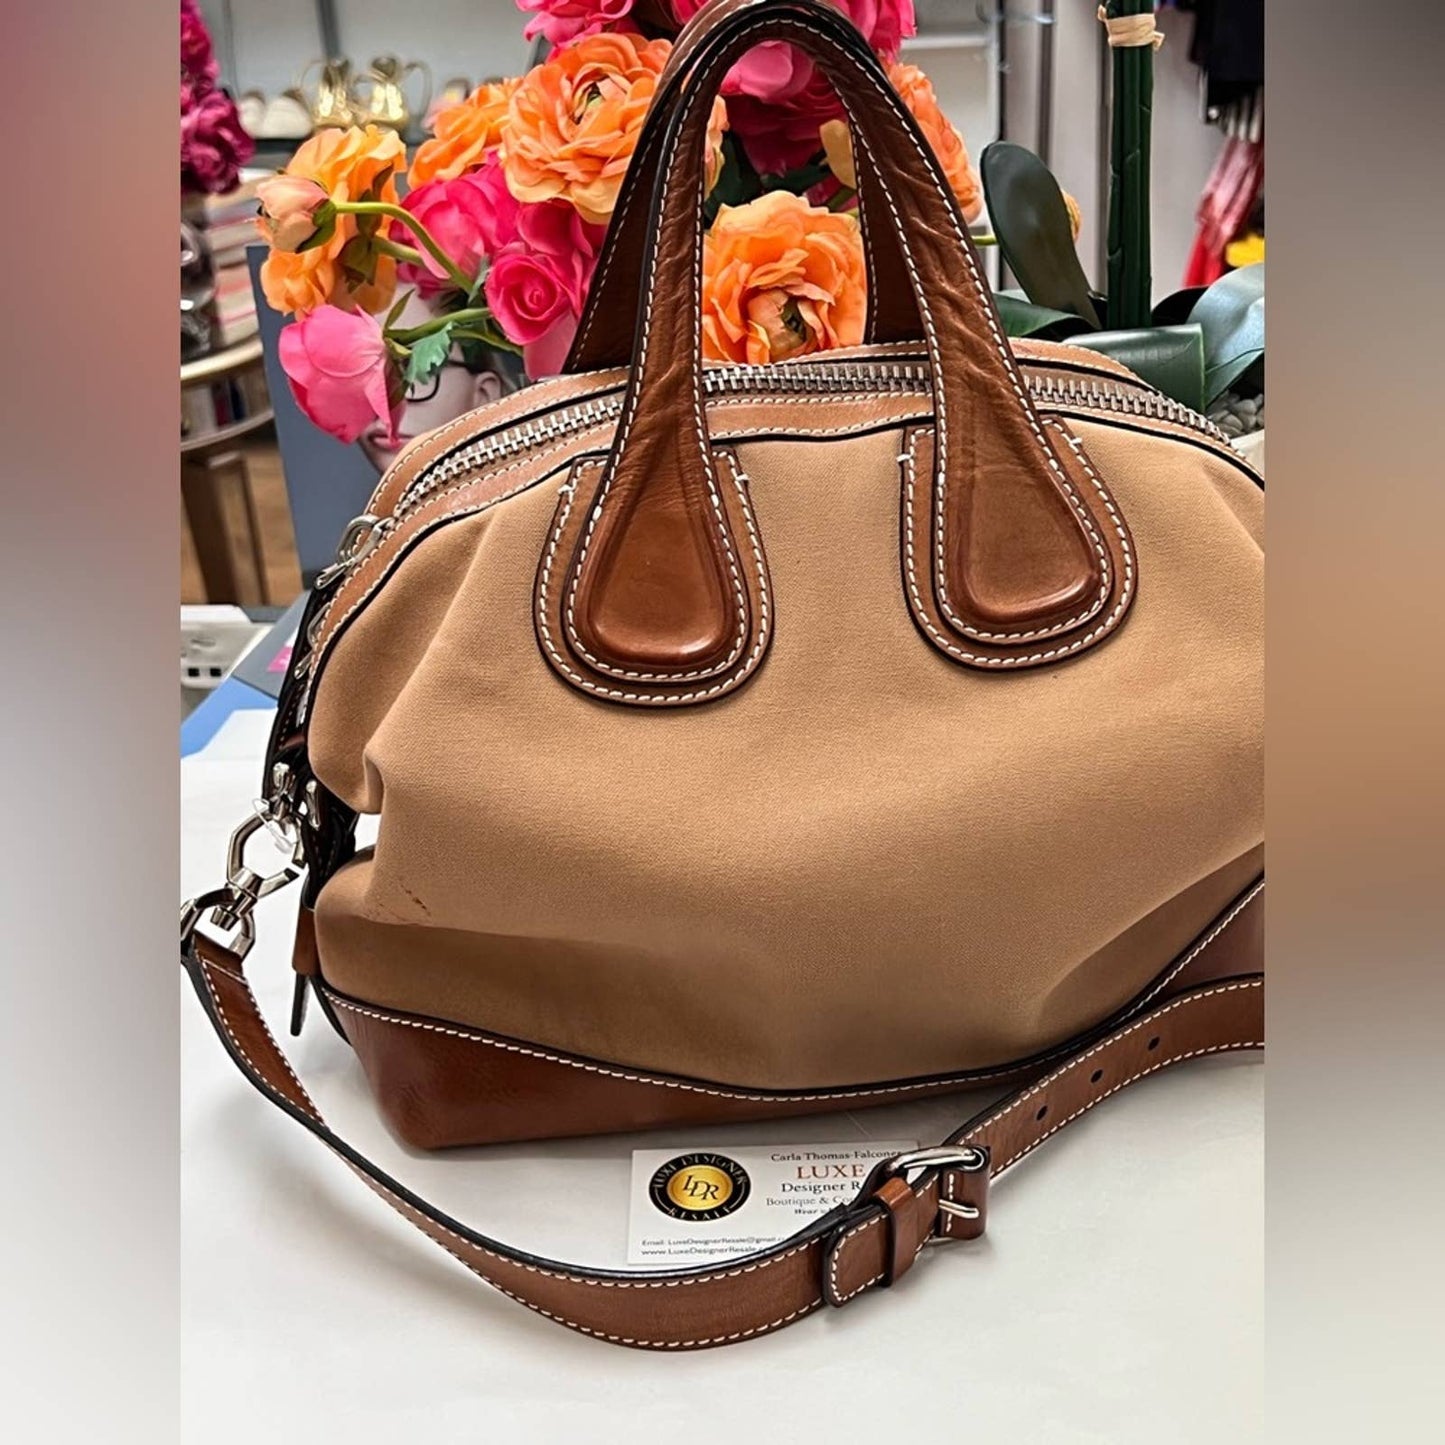 GIVENCHY Nightingale Brown Canvas & Leather Bag